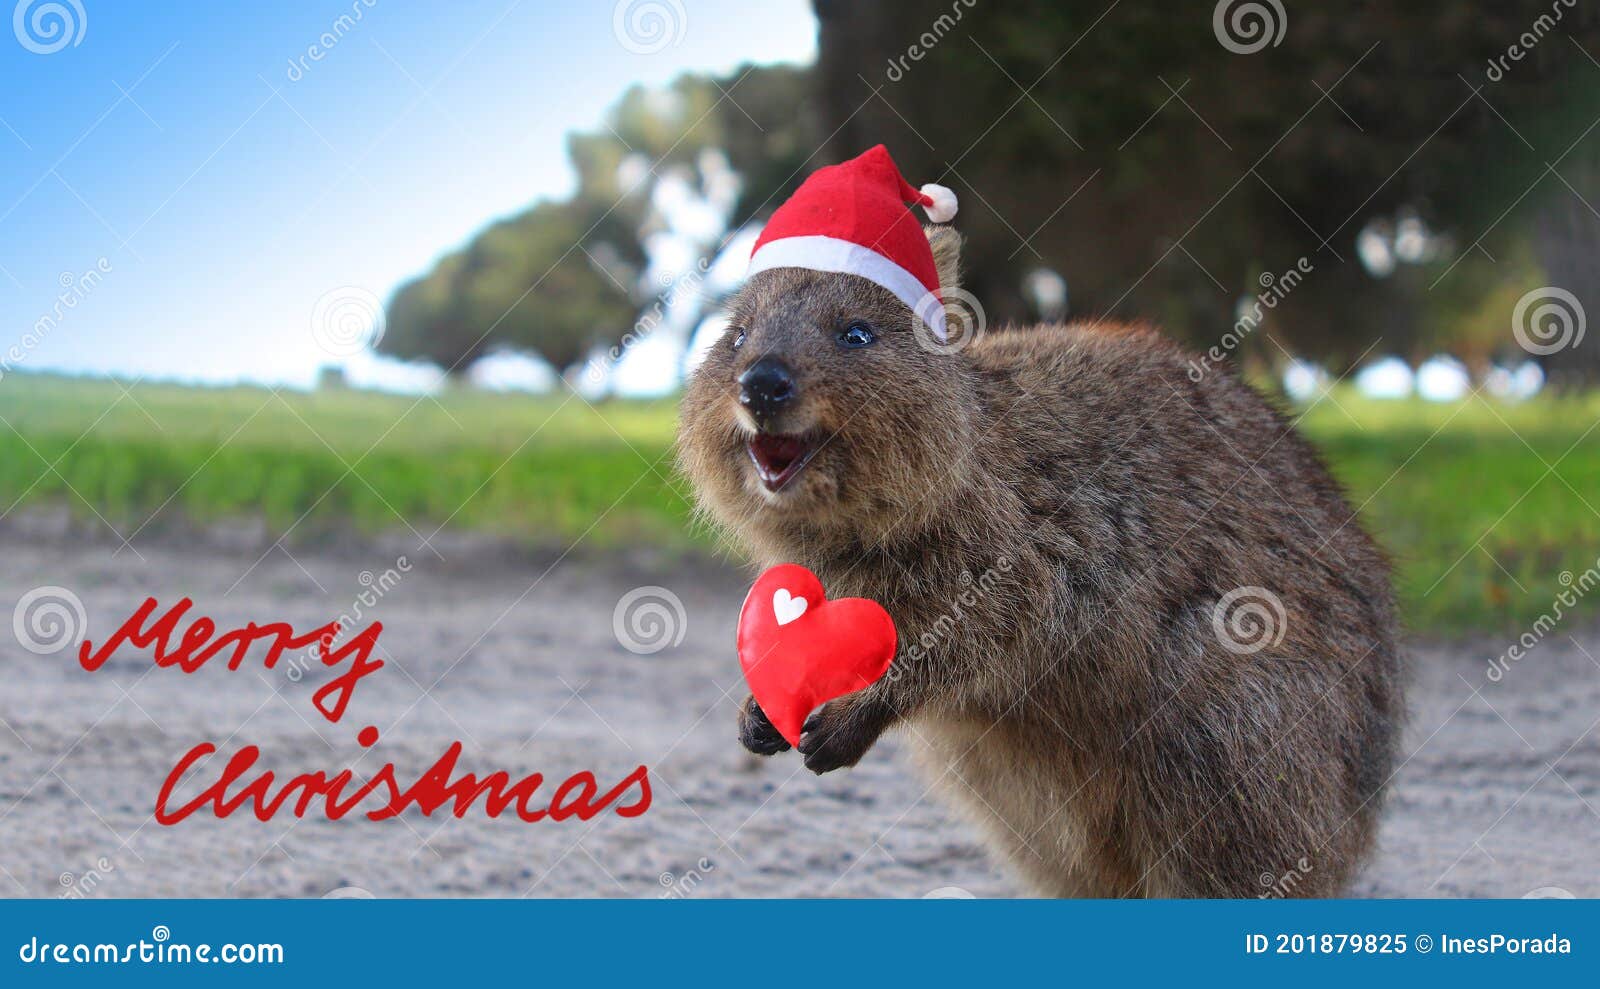 Christmas Quokka Photos - Free &amp; Royalty-Free Stock Photos from Dreamstime